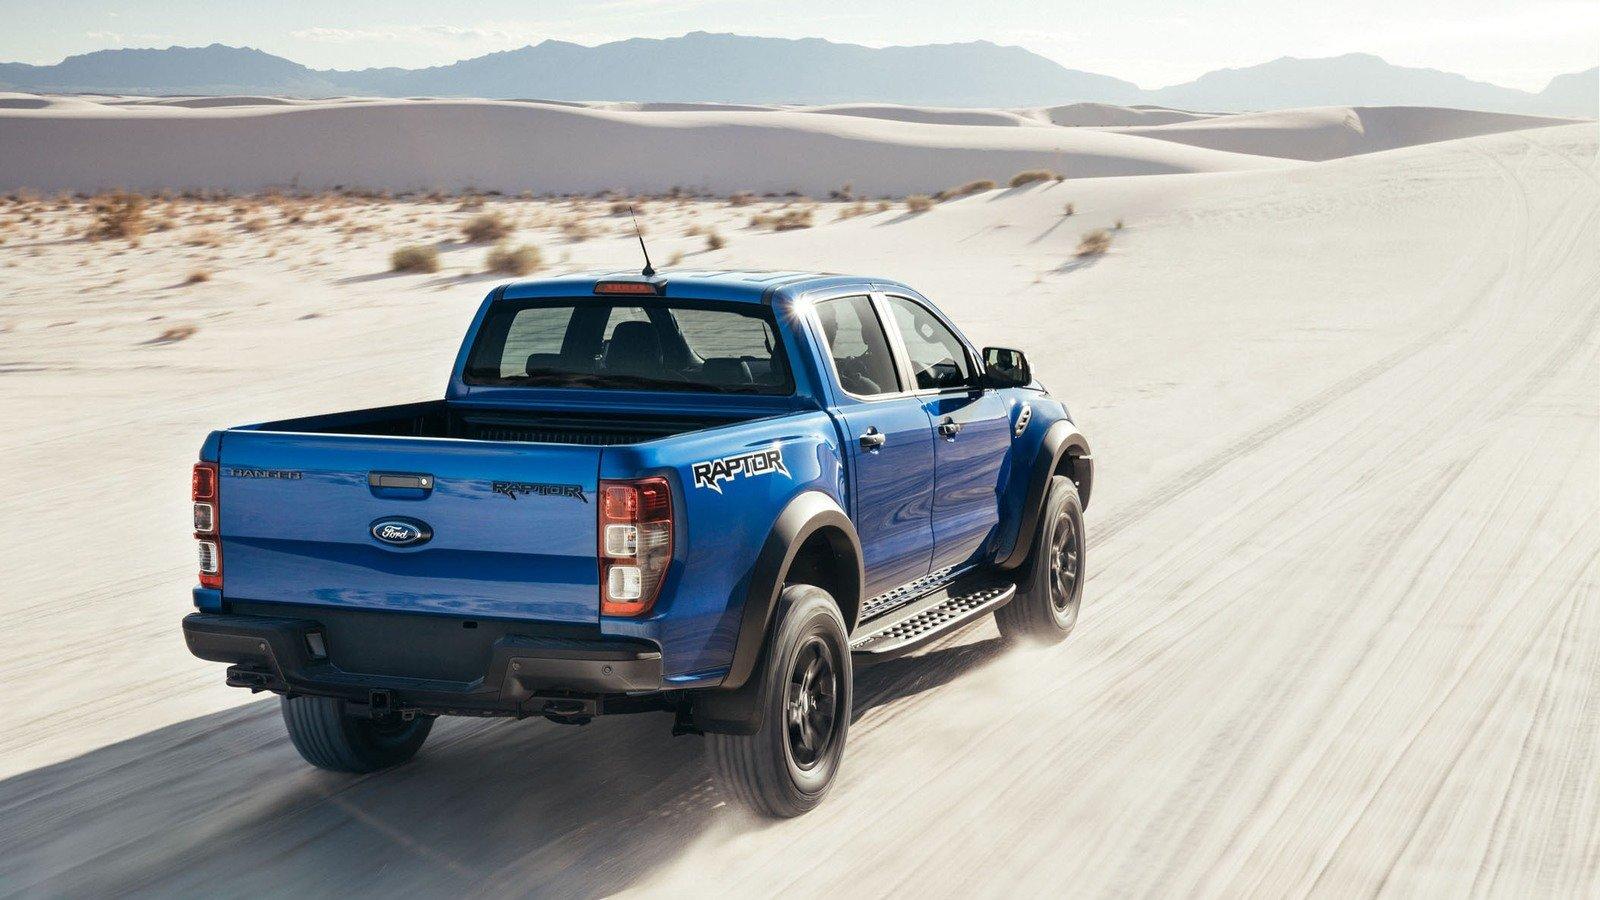 This Is It! Meet The 2019 Ford Ranger Raptor! Picture, Photo